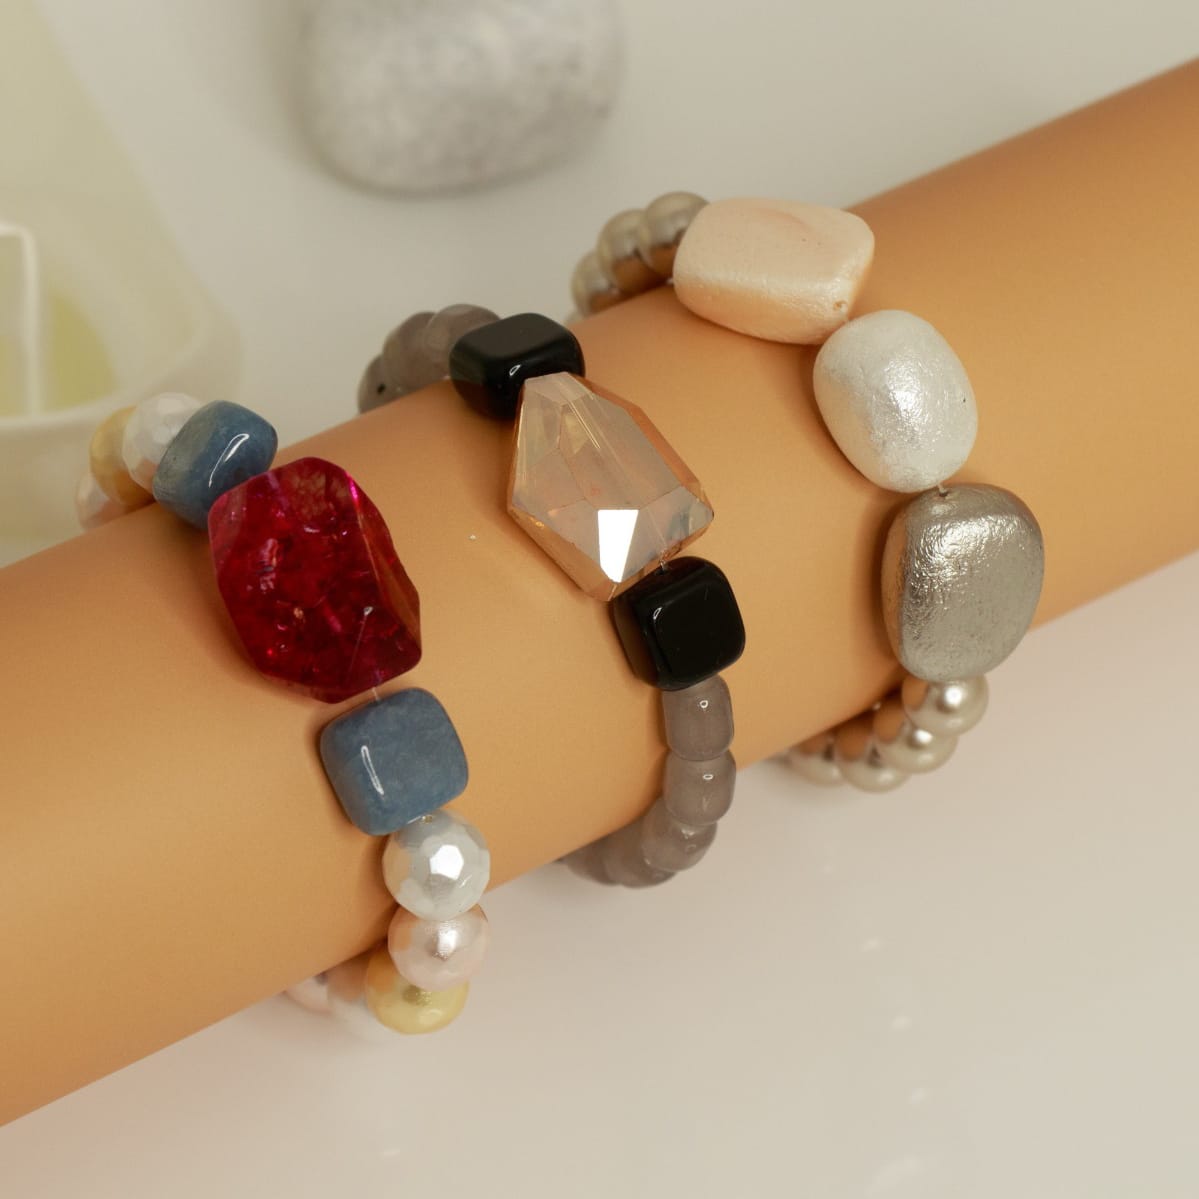 Bdiva Shell Pearl Bracelet with Shell Stone.